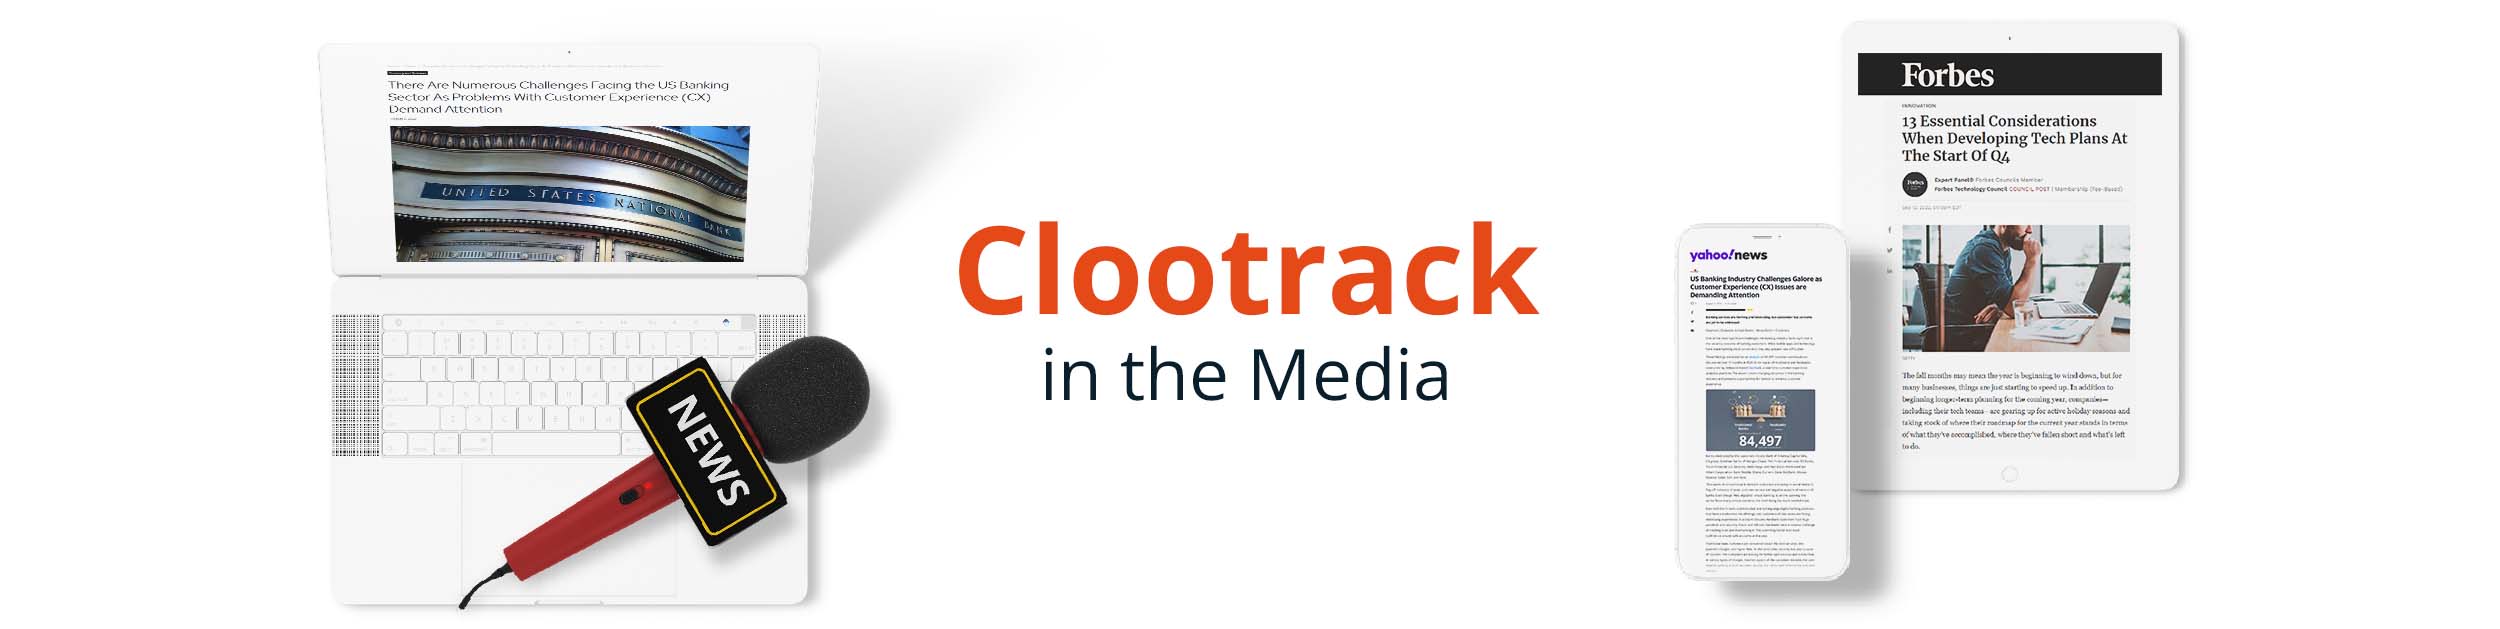 10 04 Clootrack in the media V2 Wide-1